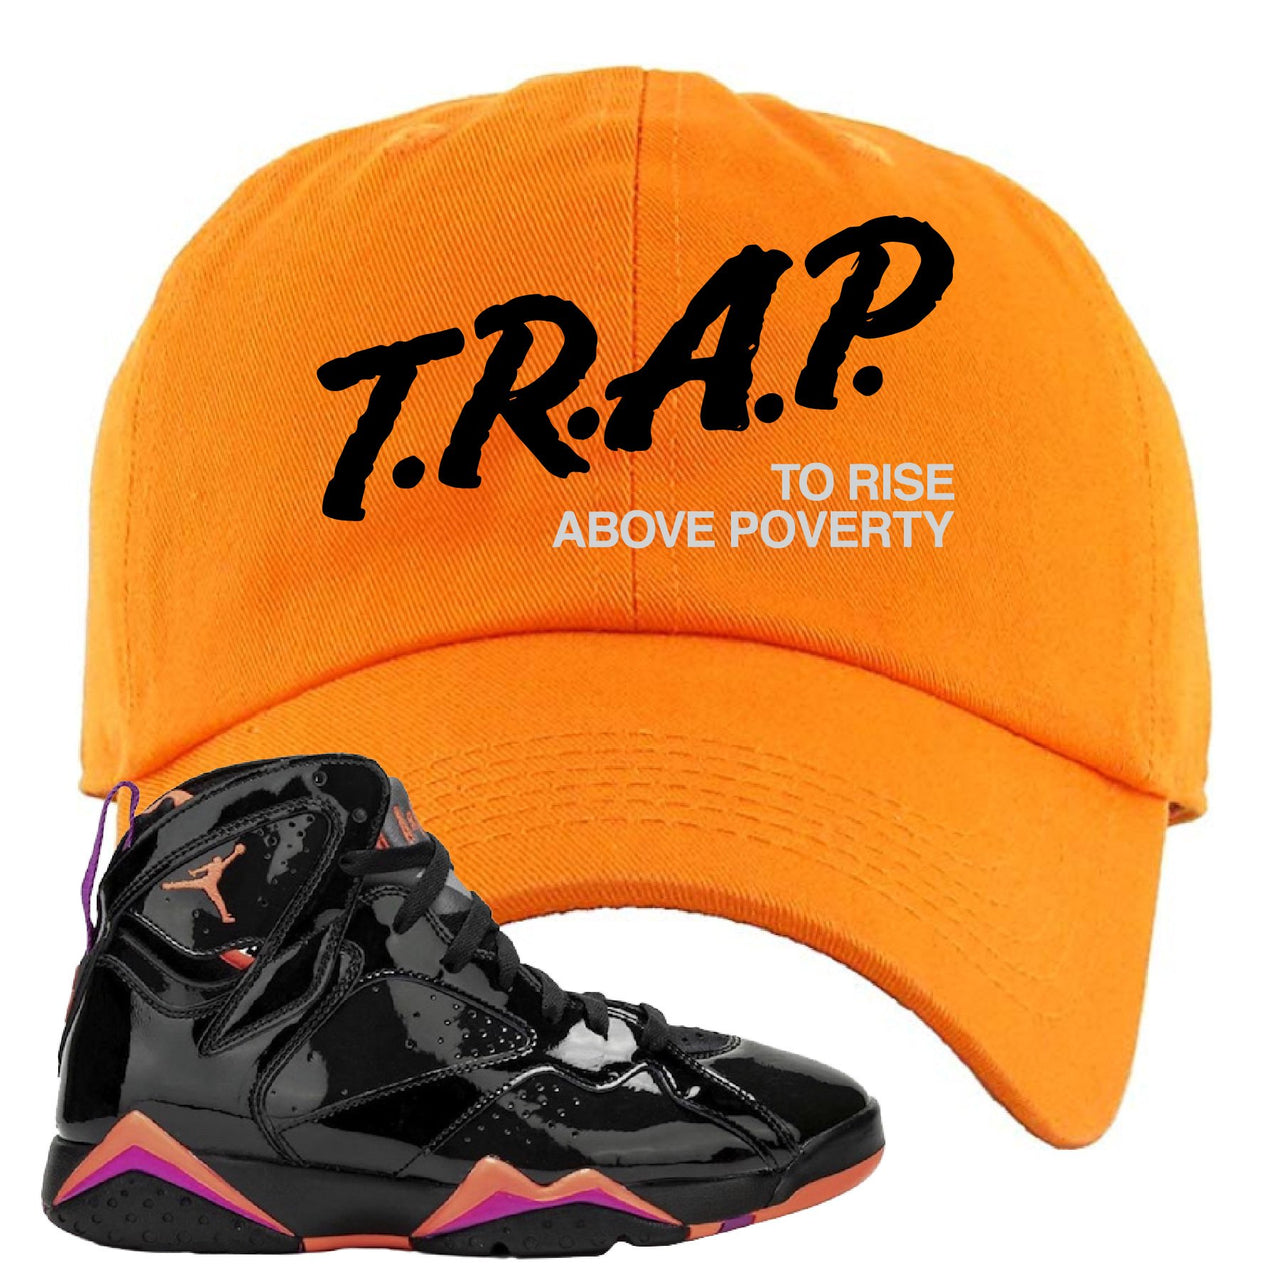 Jordan 7 WMNS Black Patent Leather Trap To Rise Above Poverty Orange Sneaker Hook Up Dad Hat